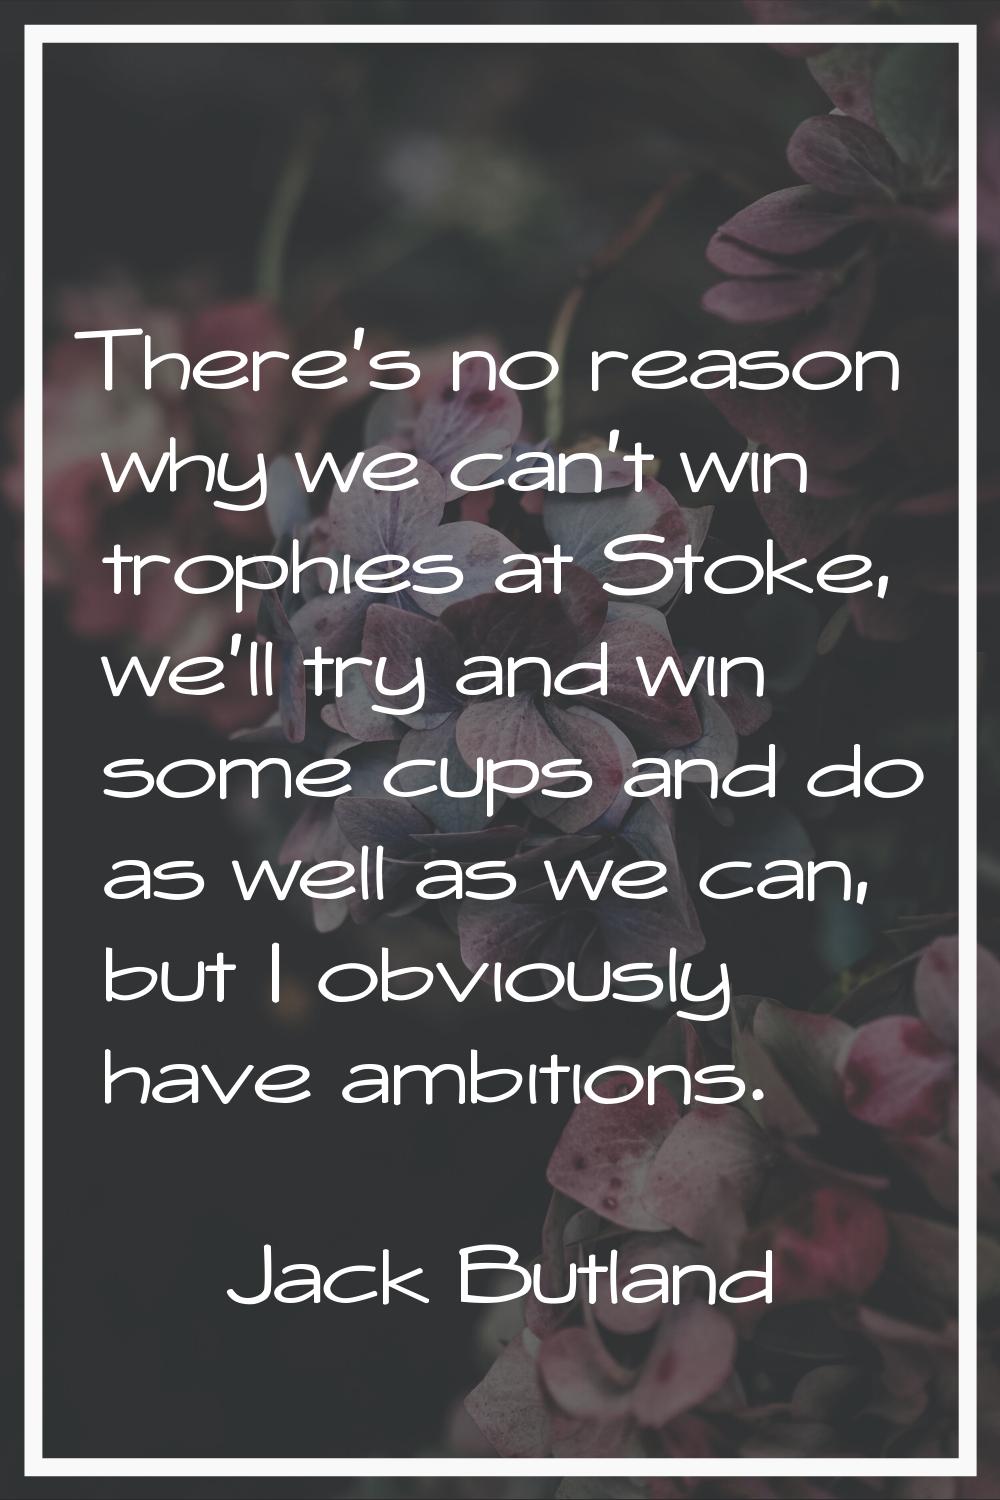 There's no reason why we can't win trophies at Stoke, we'll try and win some cups and do as well as